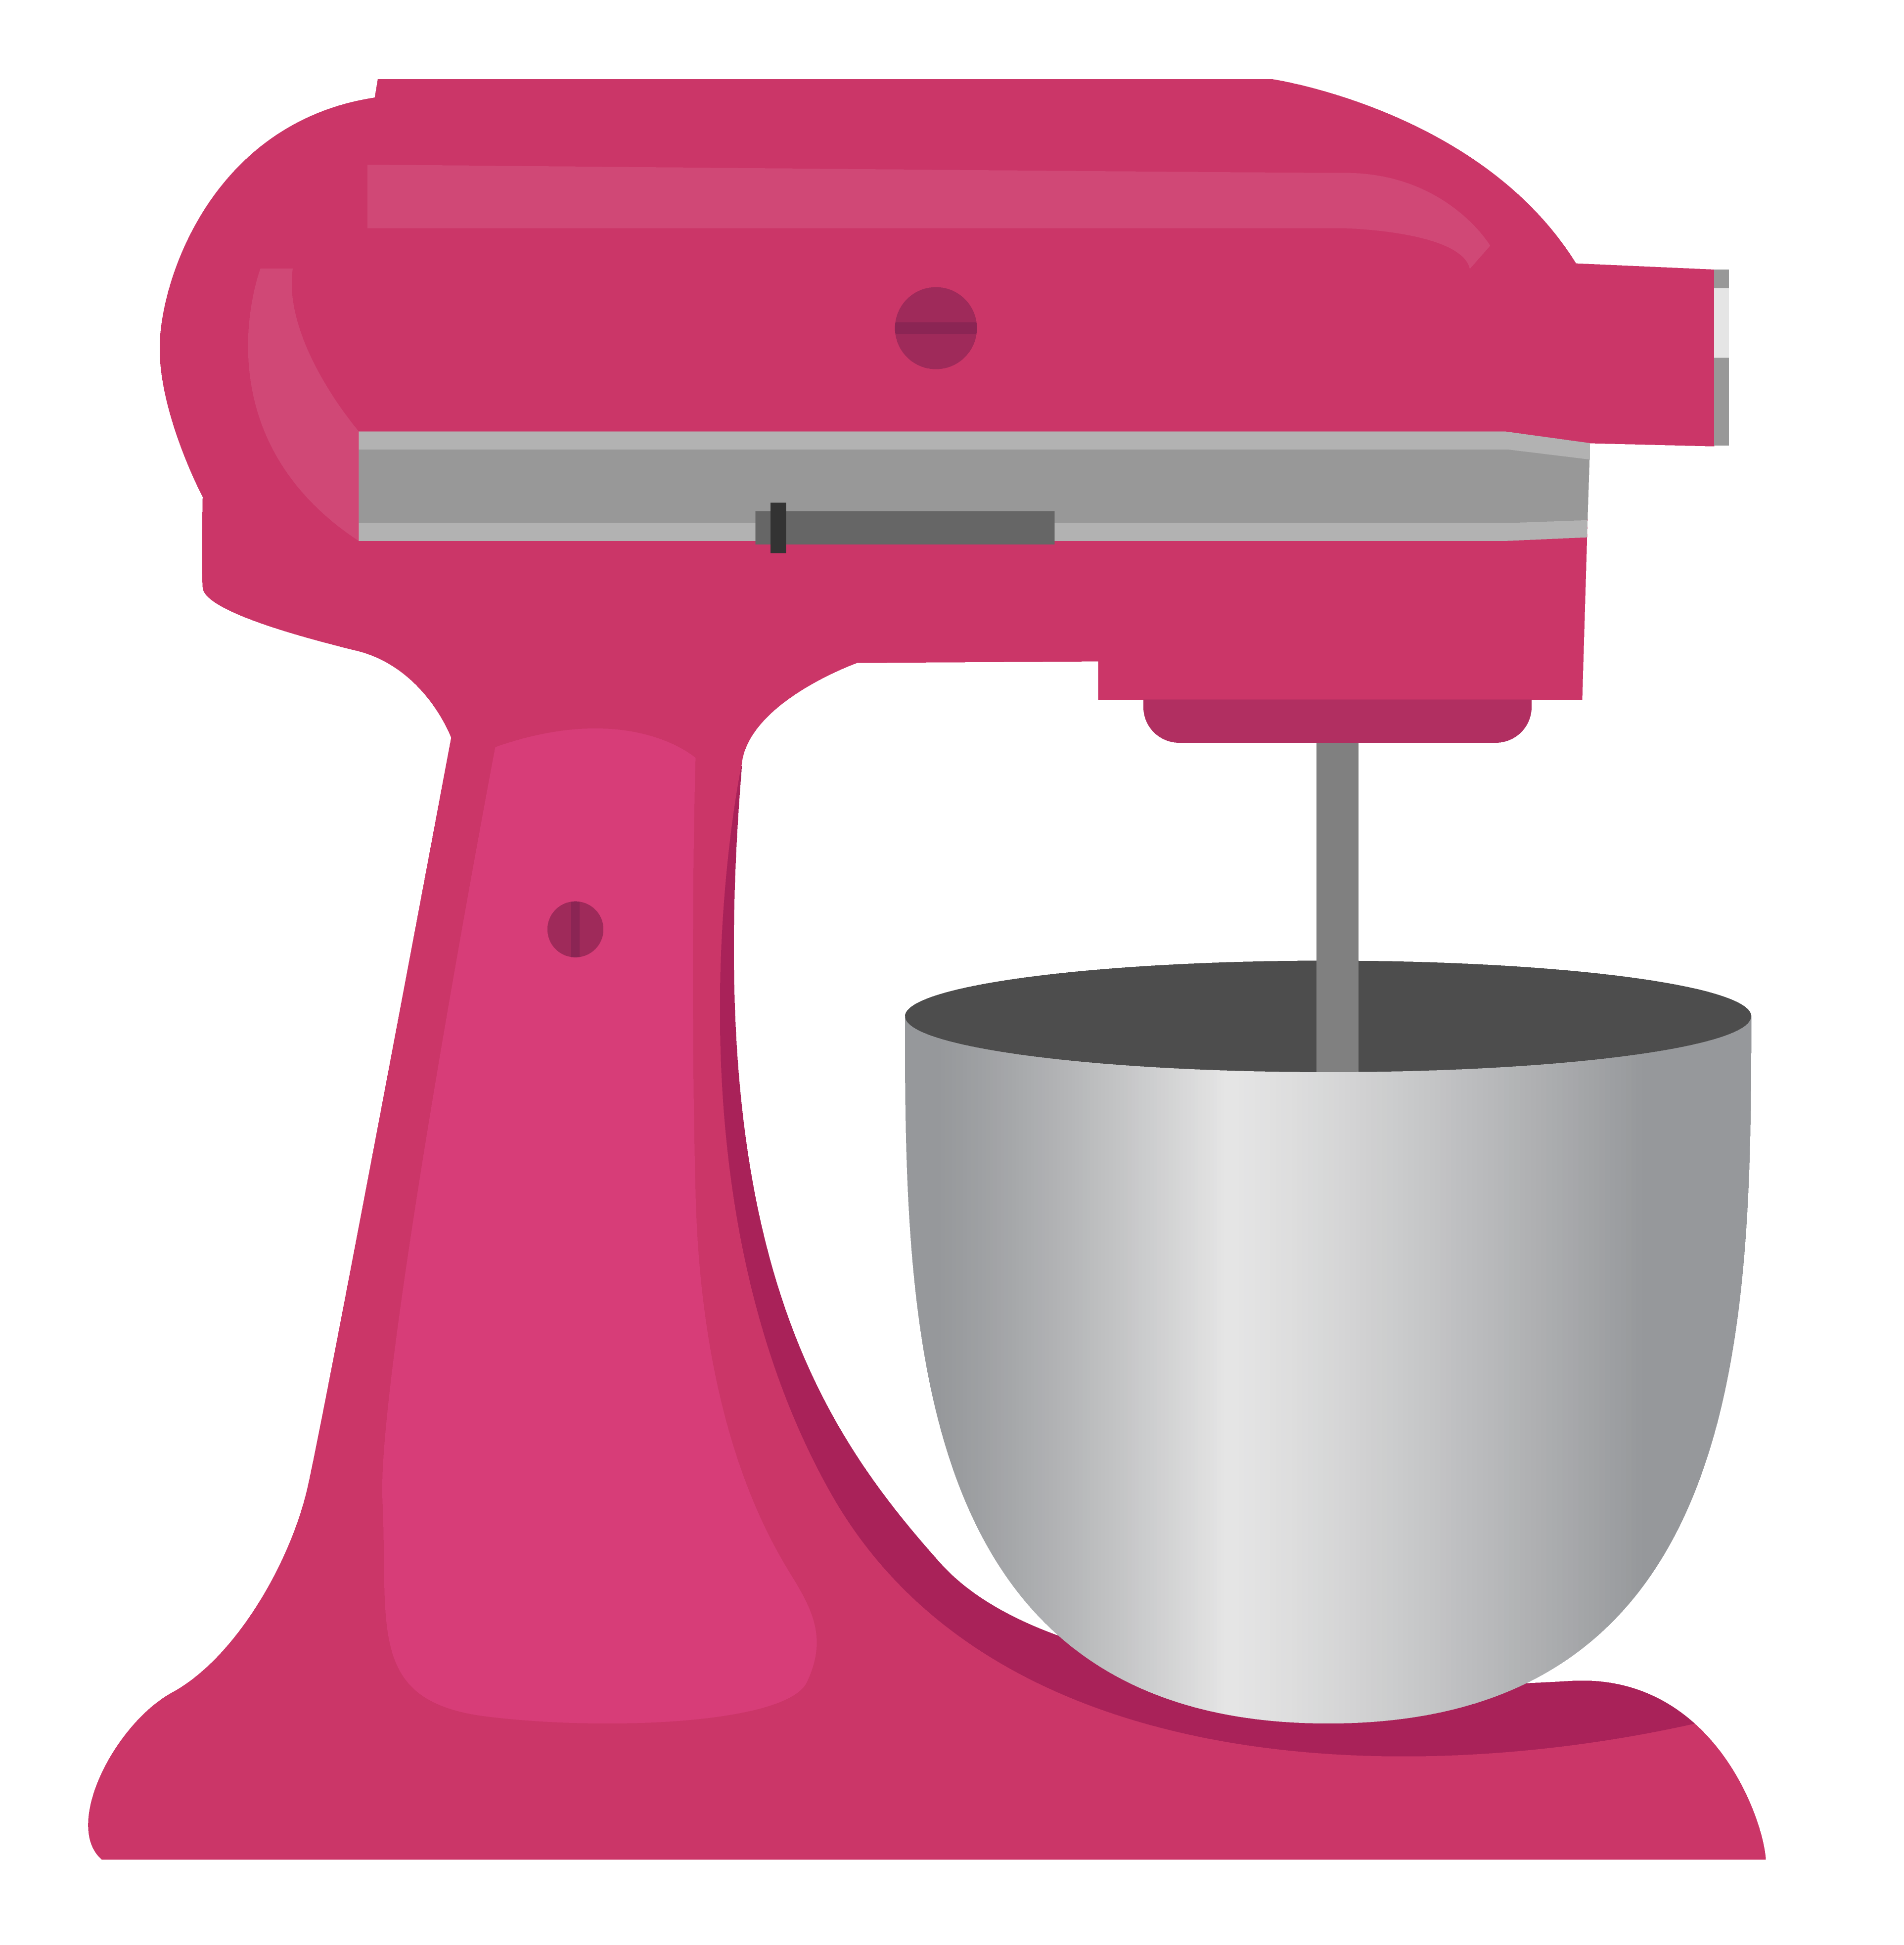 Pink oven